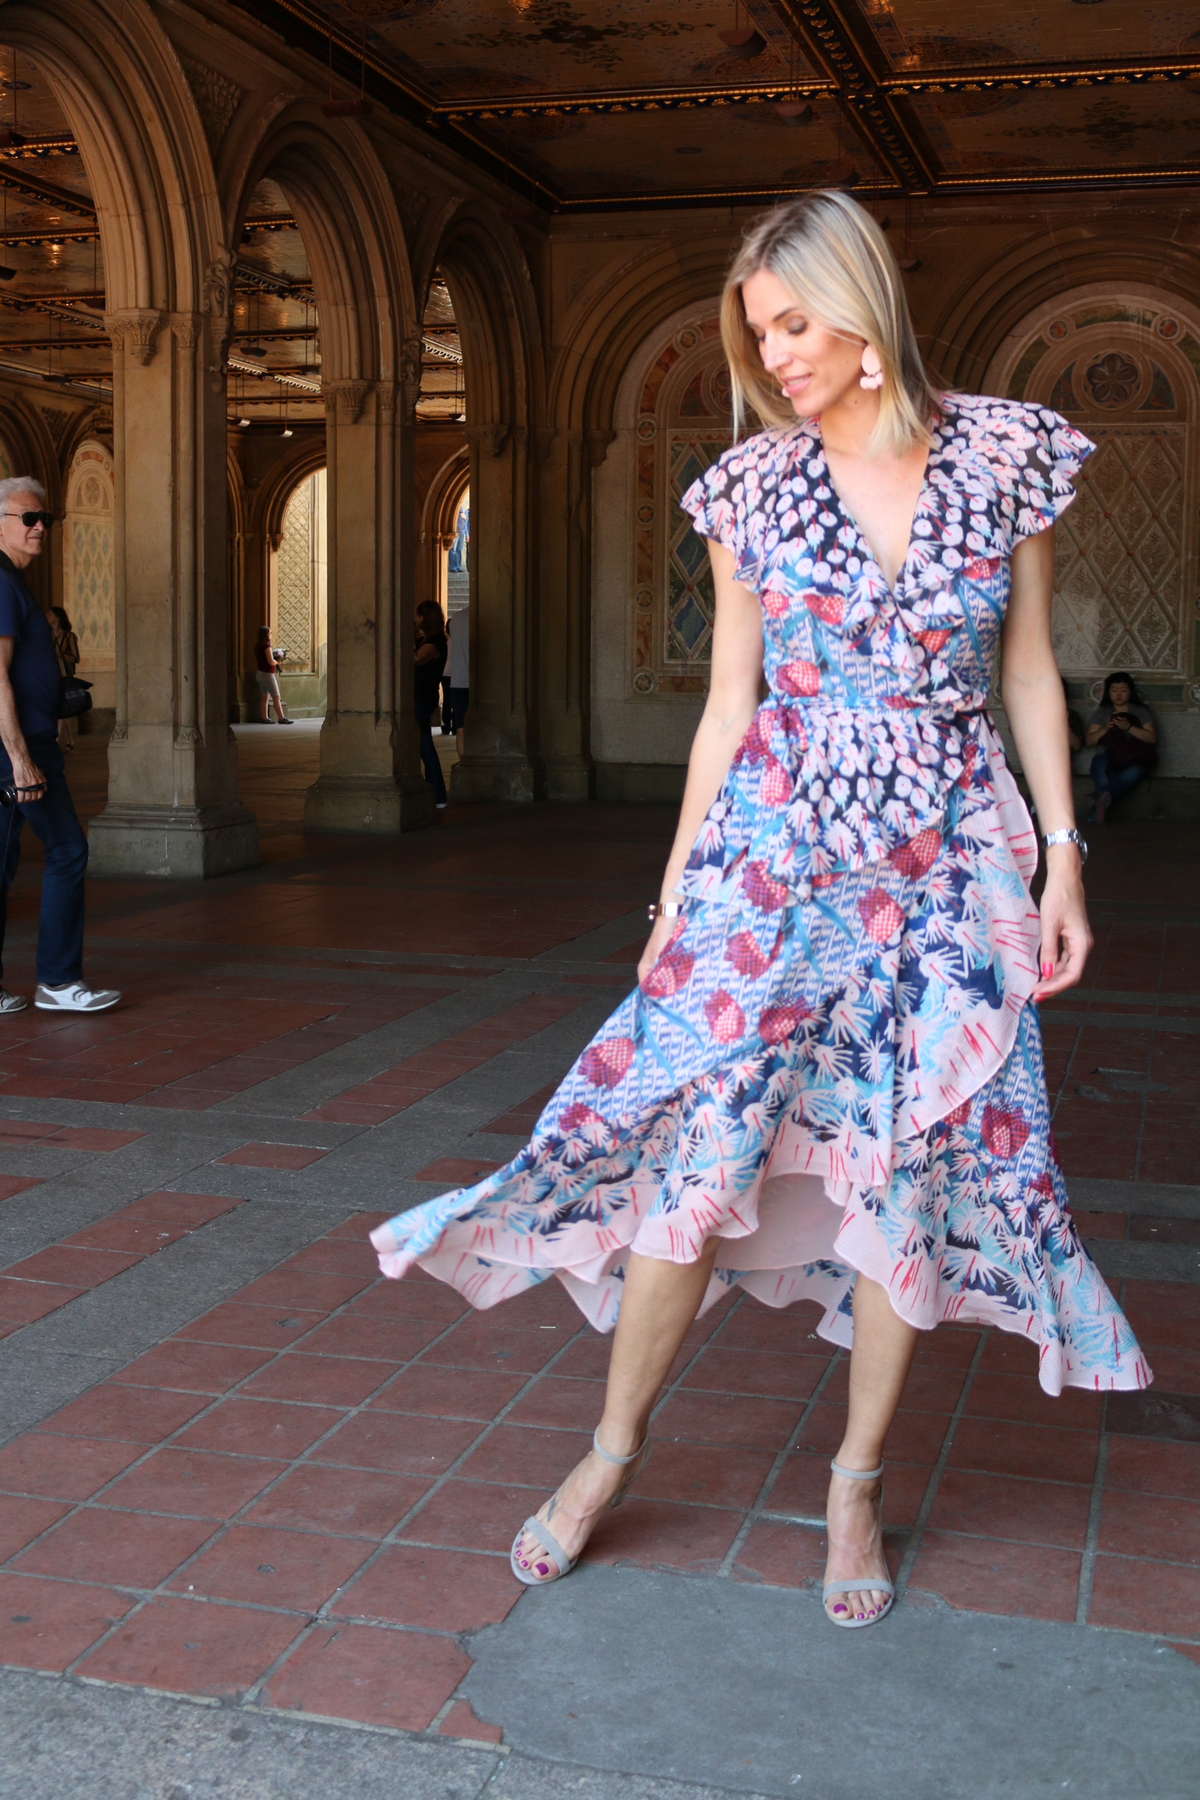 Kristen Taekmen- Stay Young! Go Dancing! The Perfect Summer Dresses